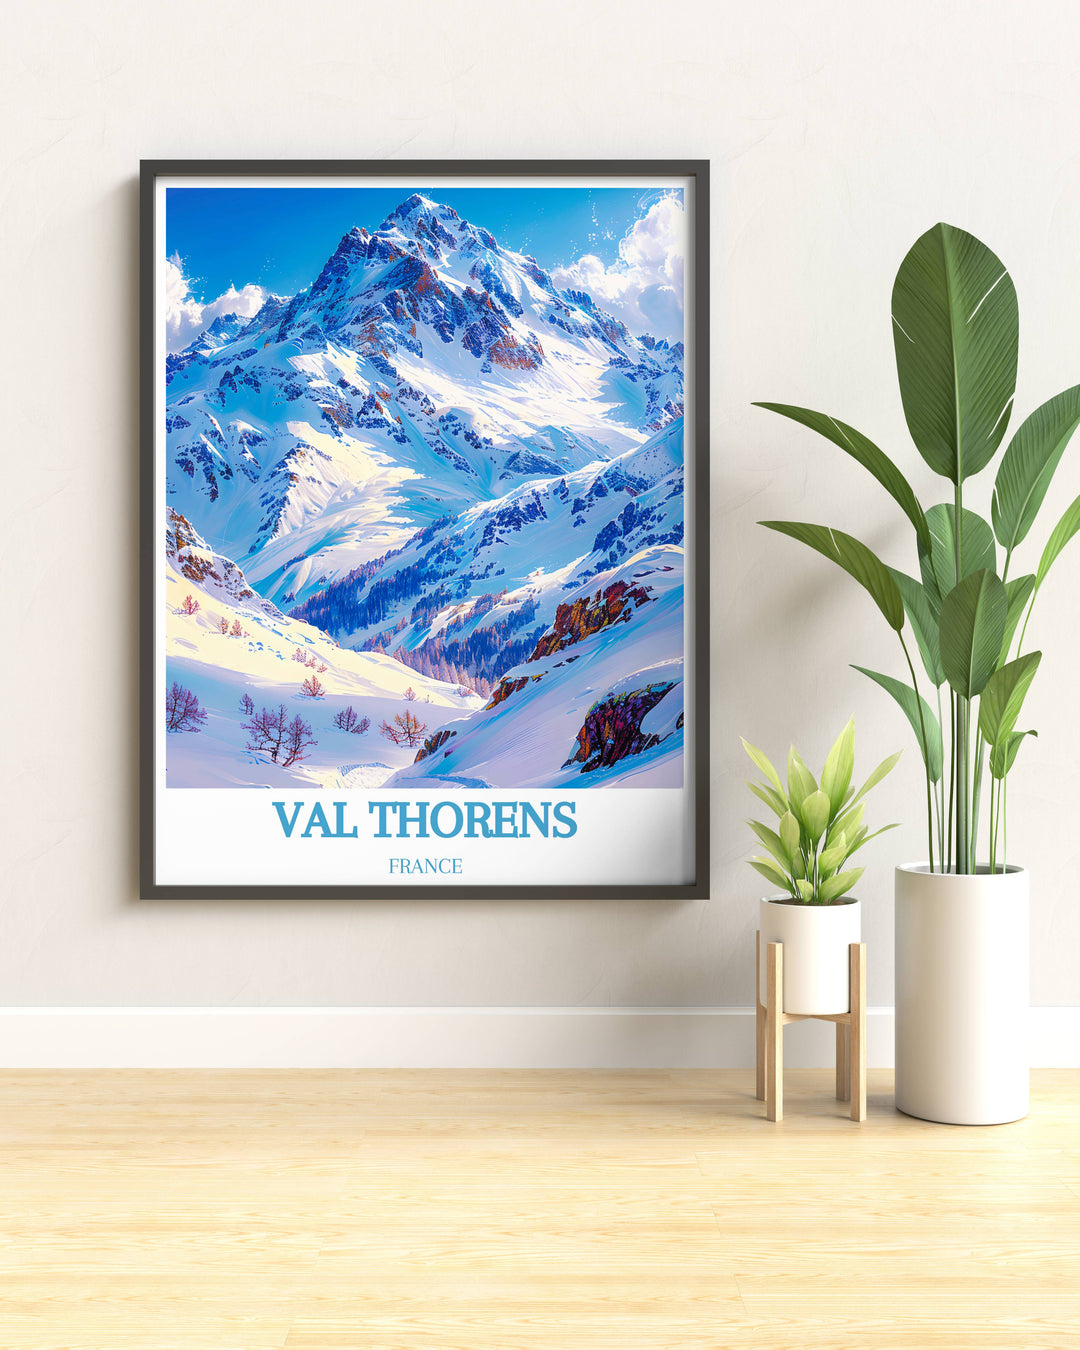 Cime Caron vintage posters depicting the timeless charm and dynamic scenery of Val Thorens, a renowned destination in the French Alps. A perfect addition to any art collection or home decor.